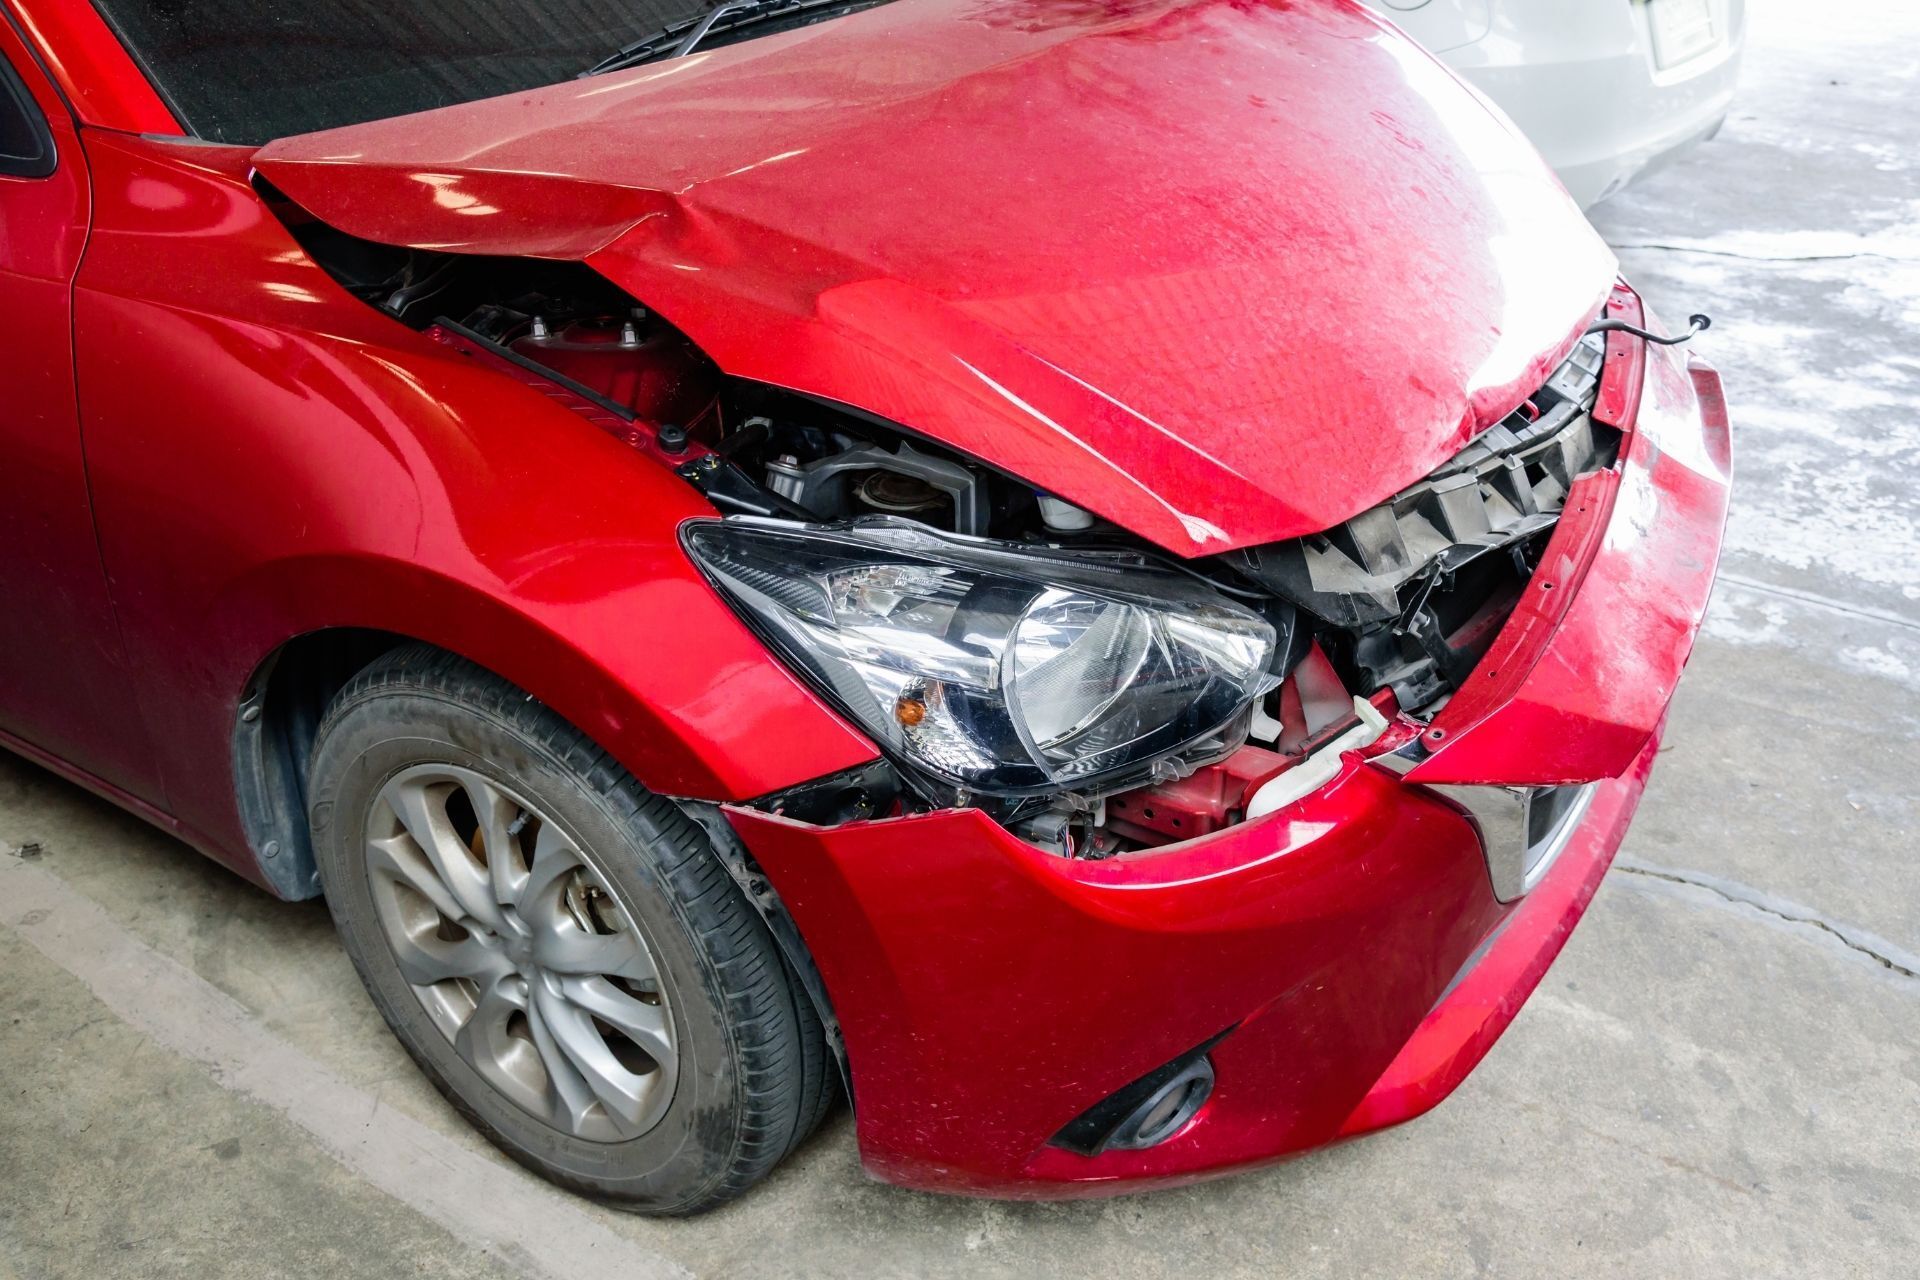 5 Tips To Get an Accurate Post-Accident Repair Estimate